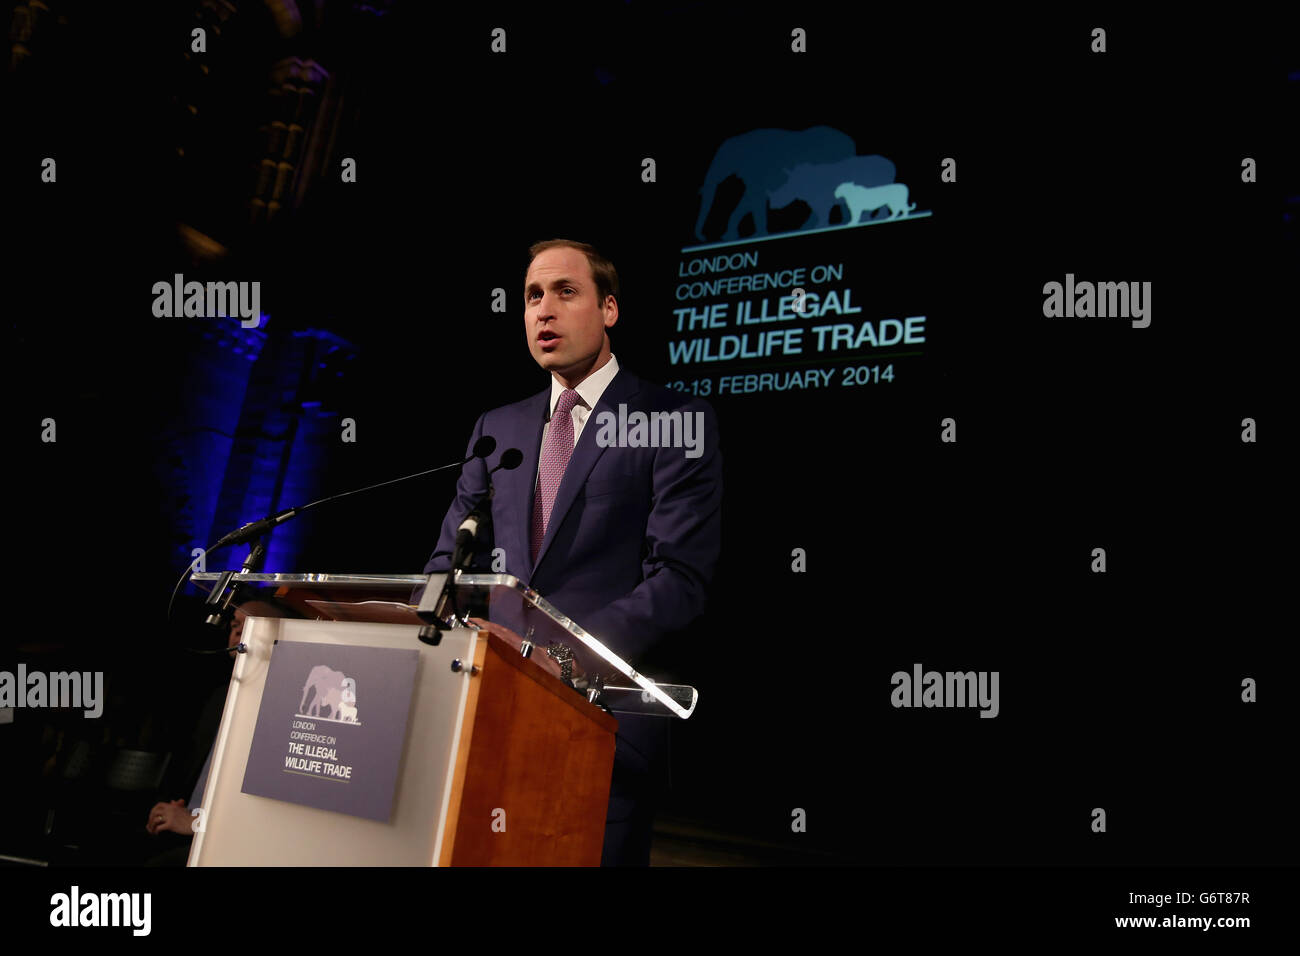 The Duke of Cambridge speaking at an evening reception for the Illegal Wildlife Trade conference at the Natural History Museum, London. Stock Photo